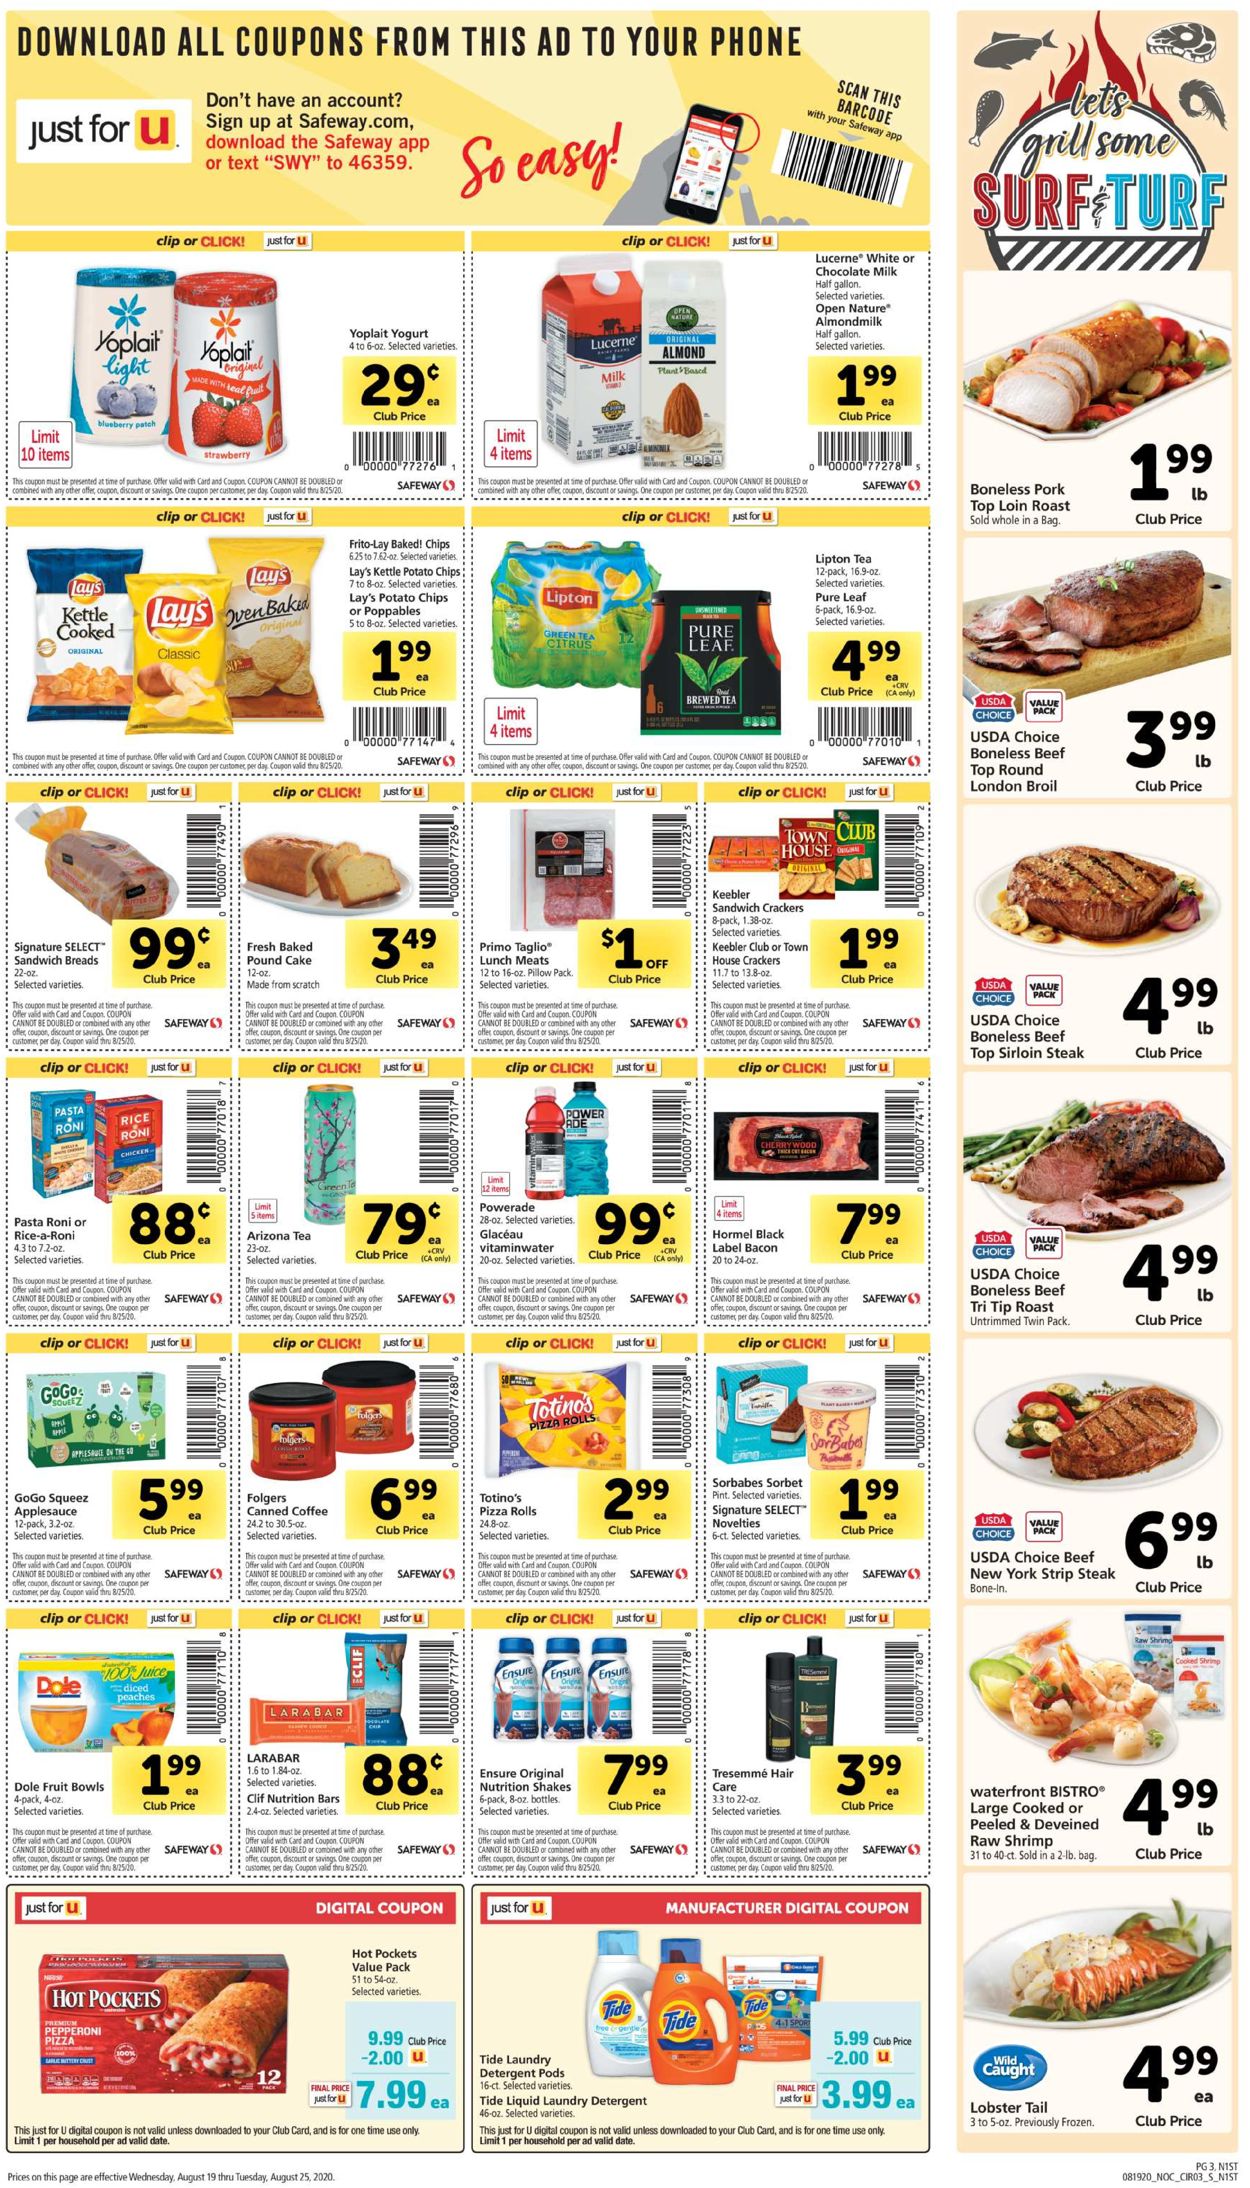 Safeway Current weekly ad 08/19 - 08/25/2020 [3] - frequent-ads.com